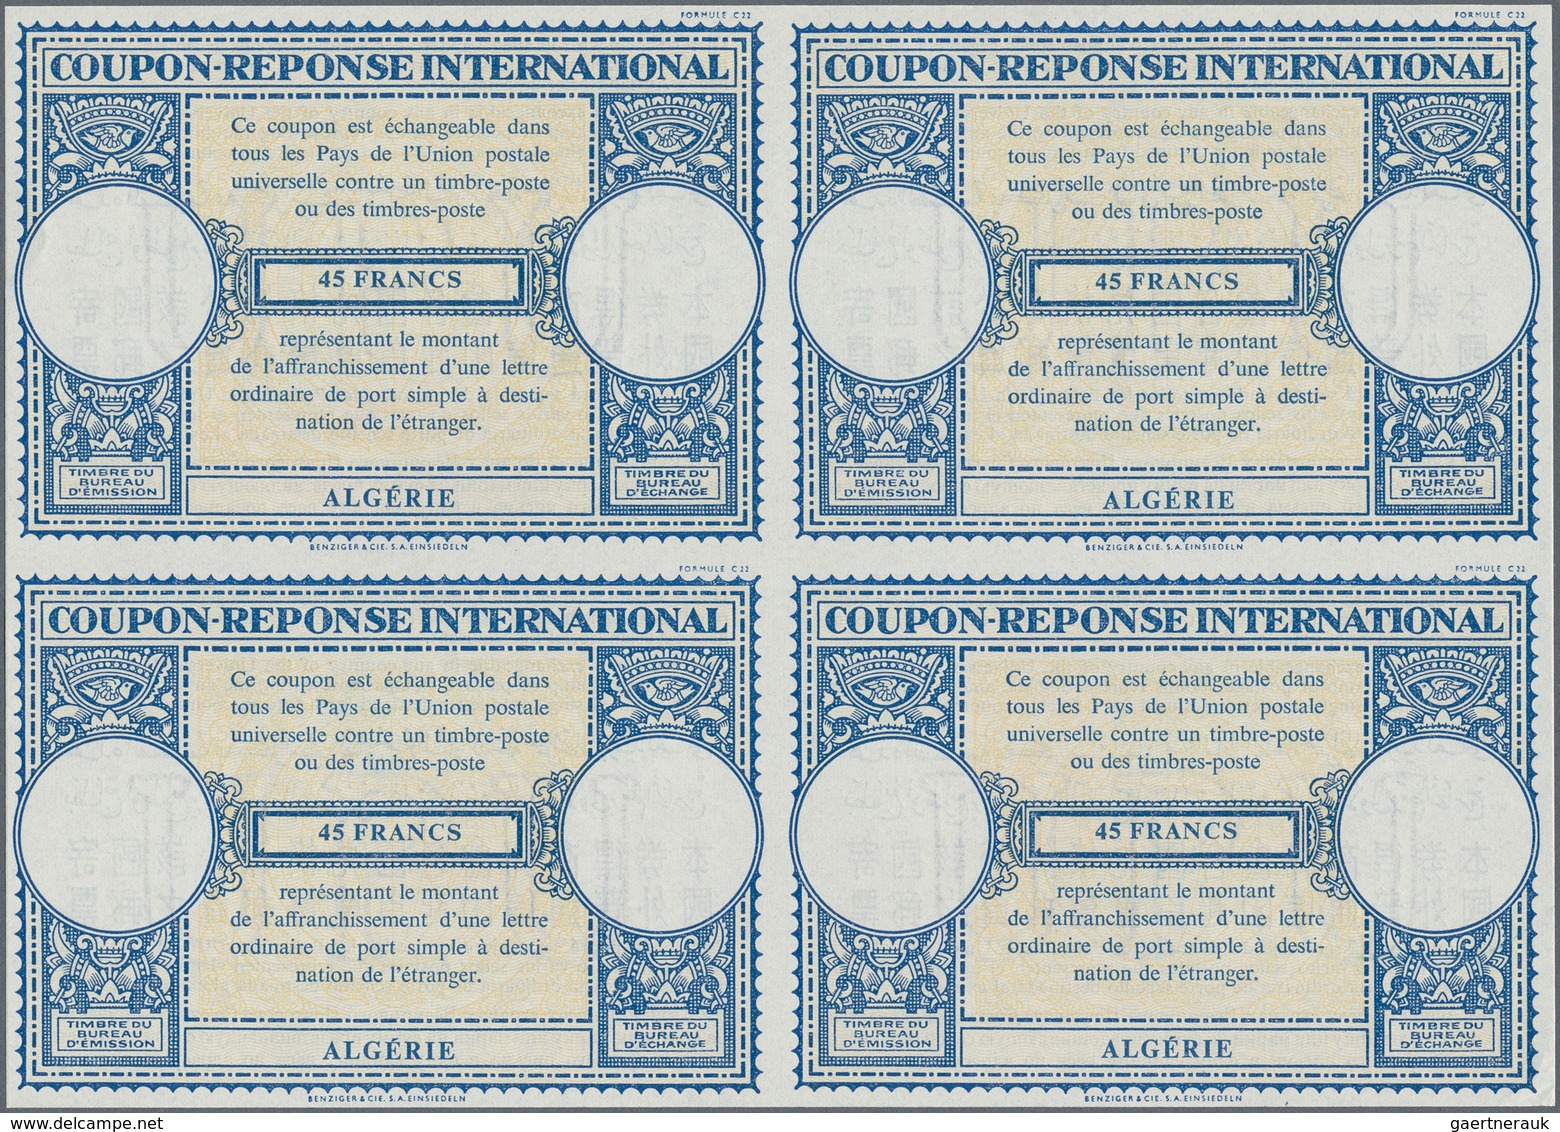 Algerien: 1950s (approx). International Reply Coupon 45 Francs (London Type) In An Unused Block Of 4 - Lettres & Documents